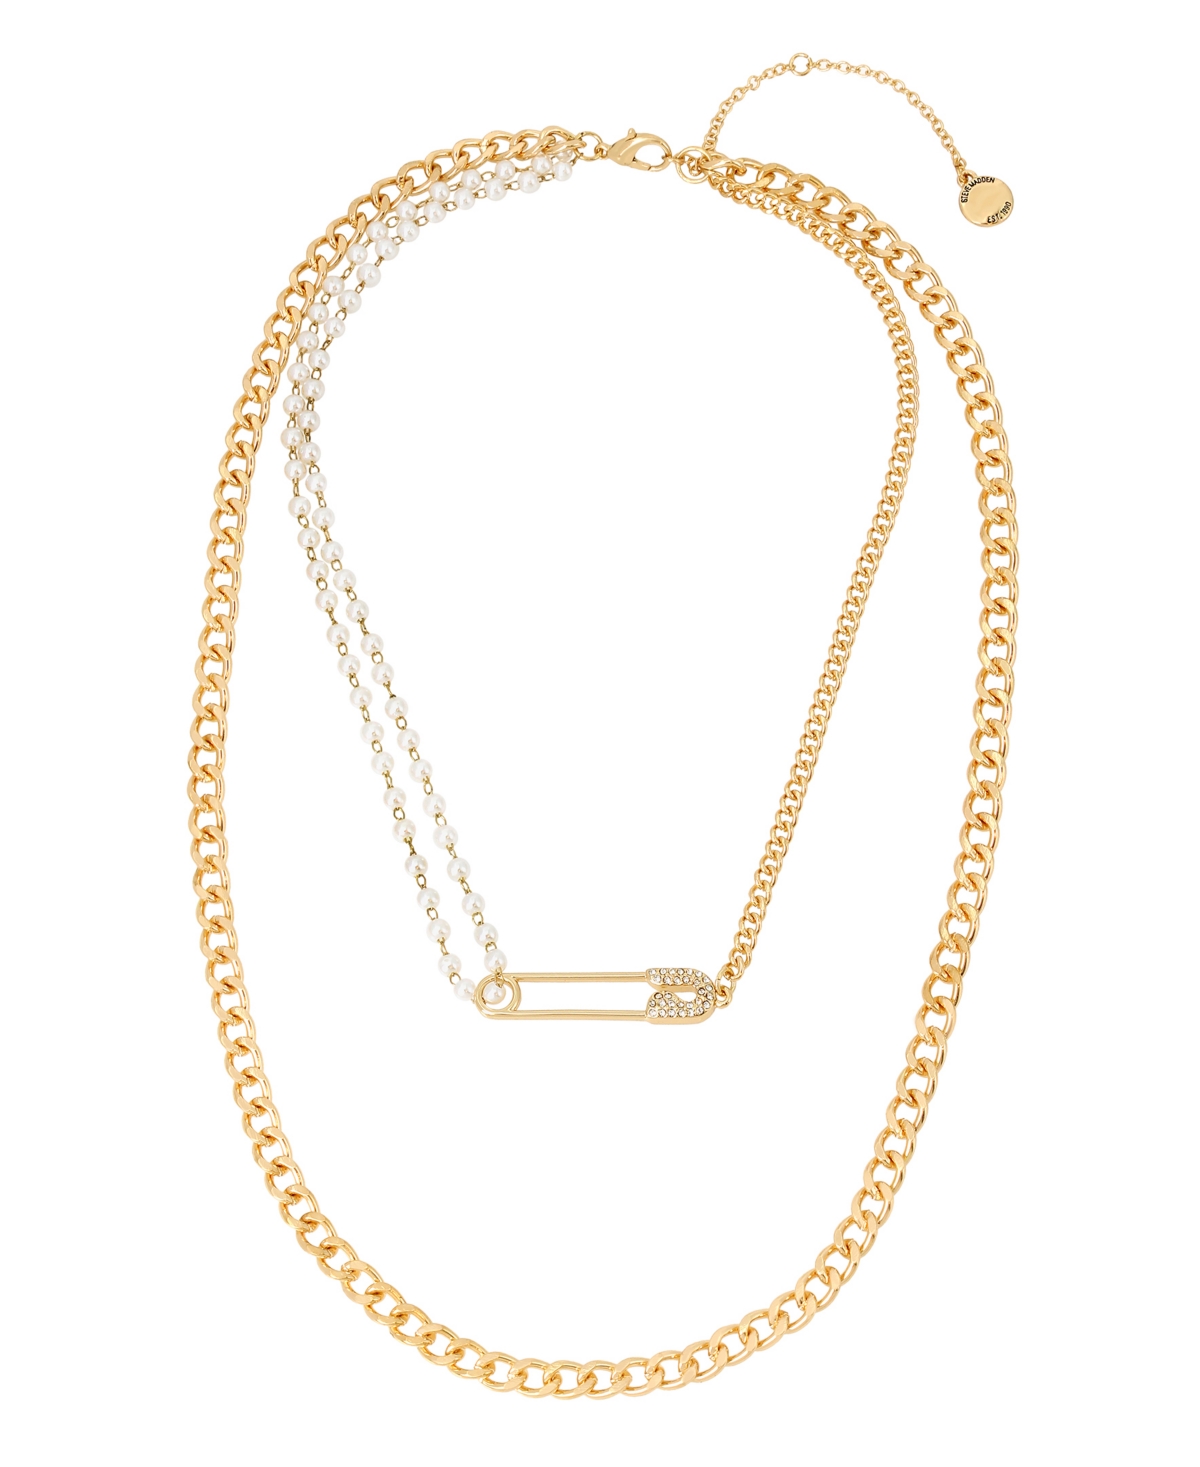 Safety Pin Layered Necklace - Crystal